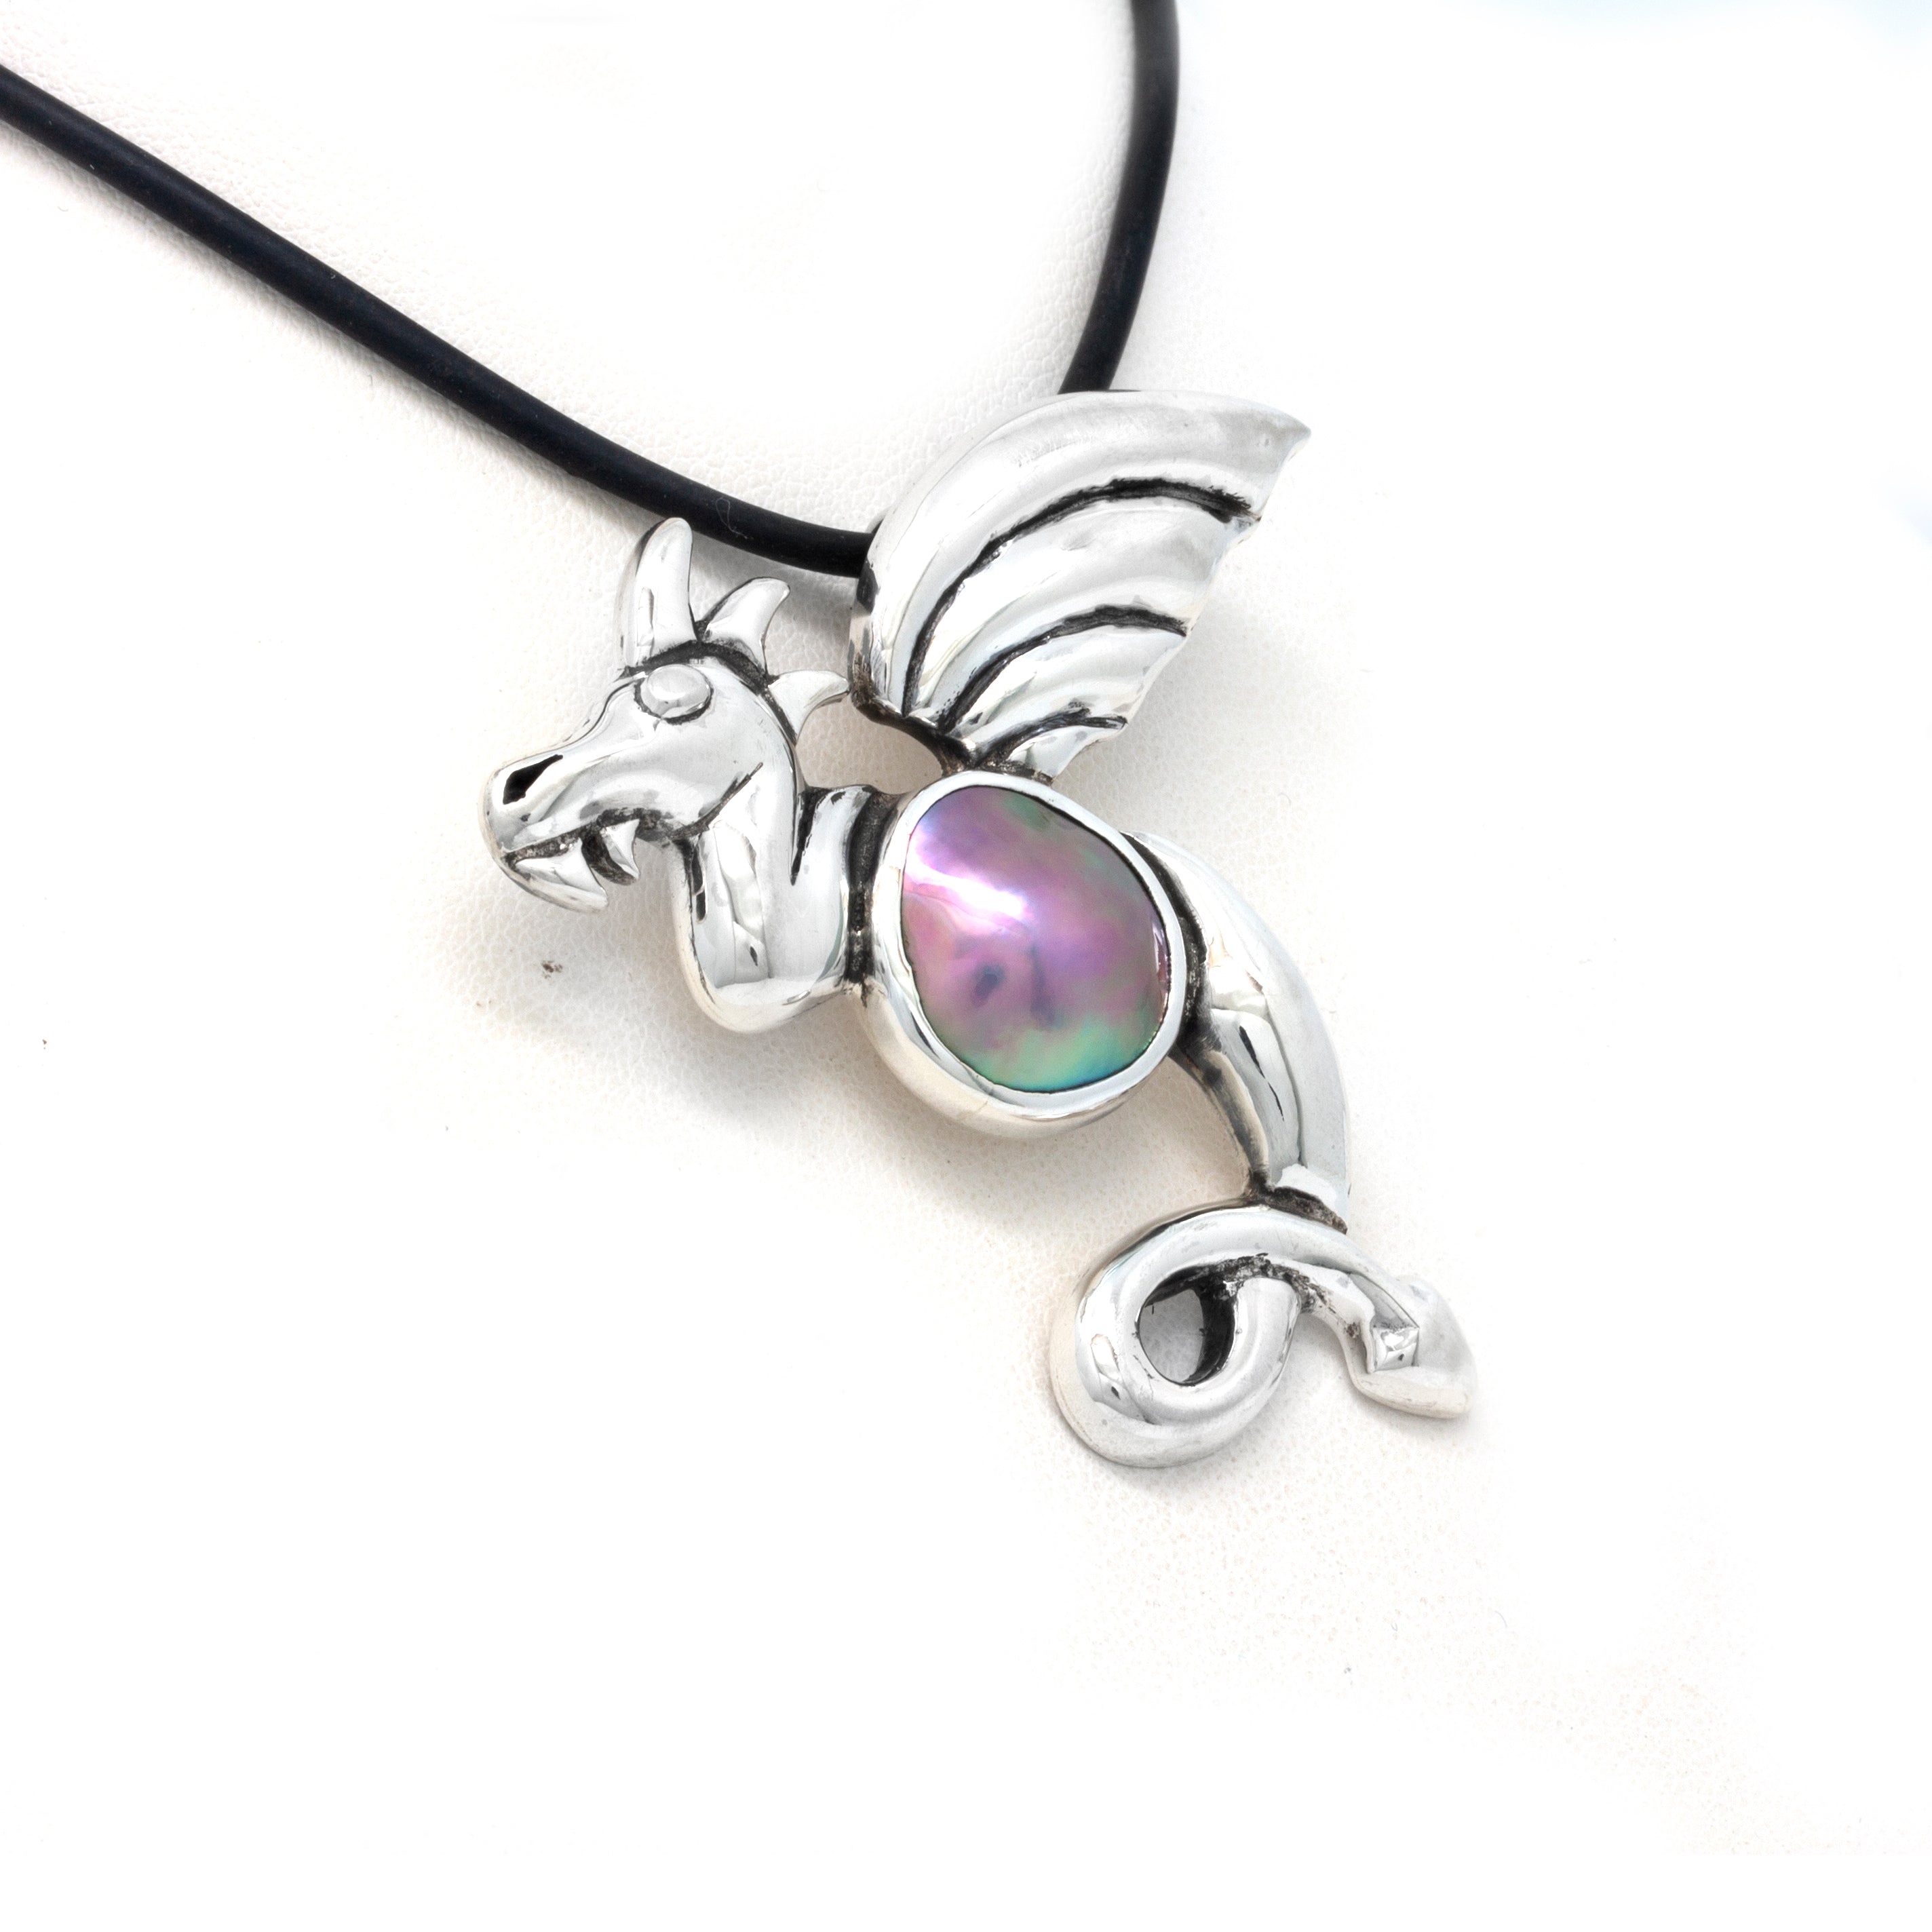 "Dragon" Pendant with Cortez Mabe Pearl by Priscila Canales